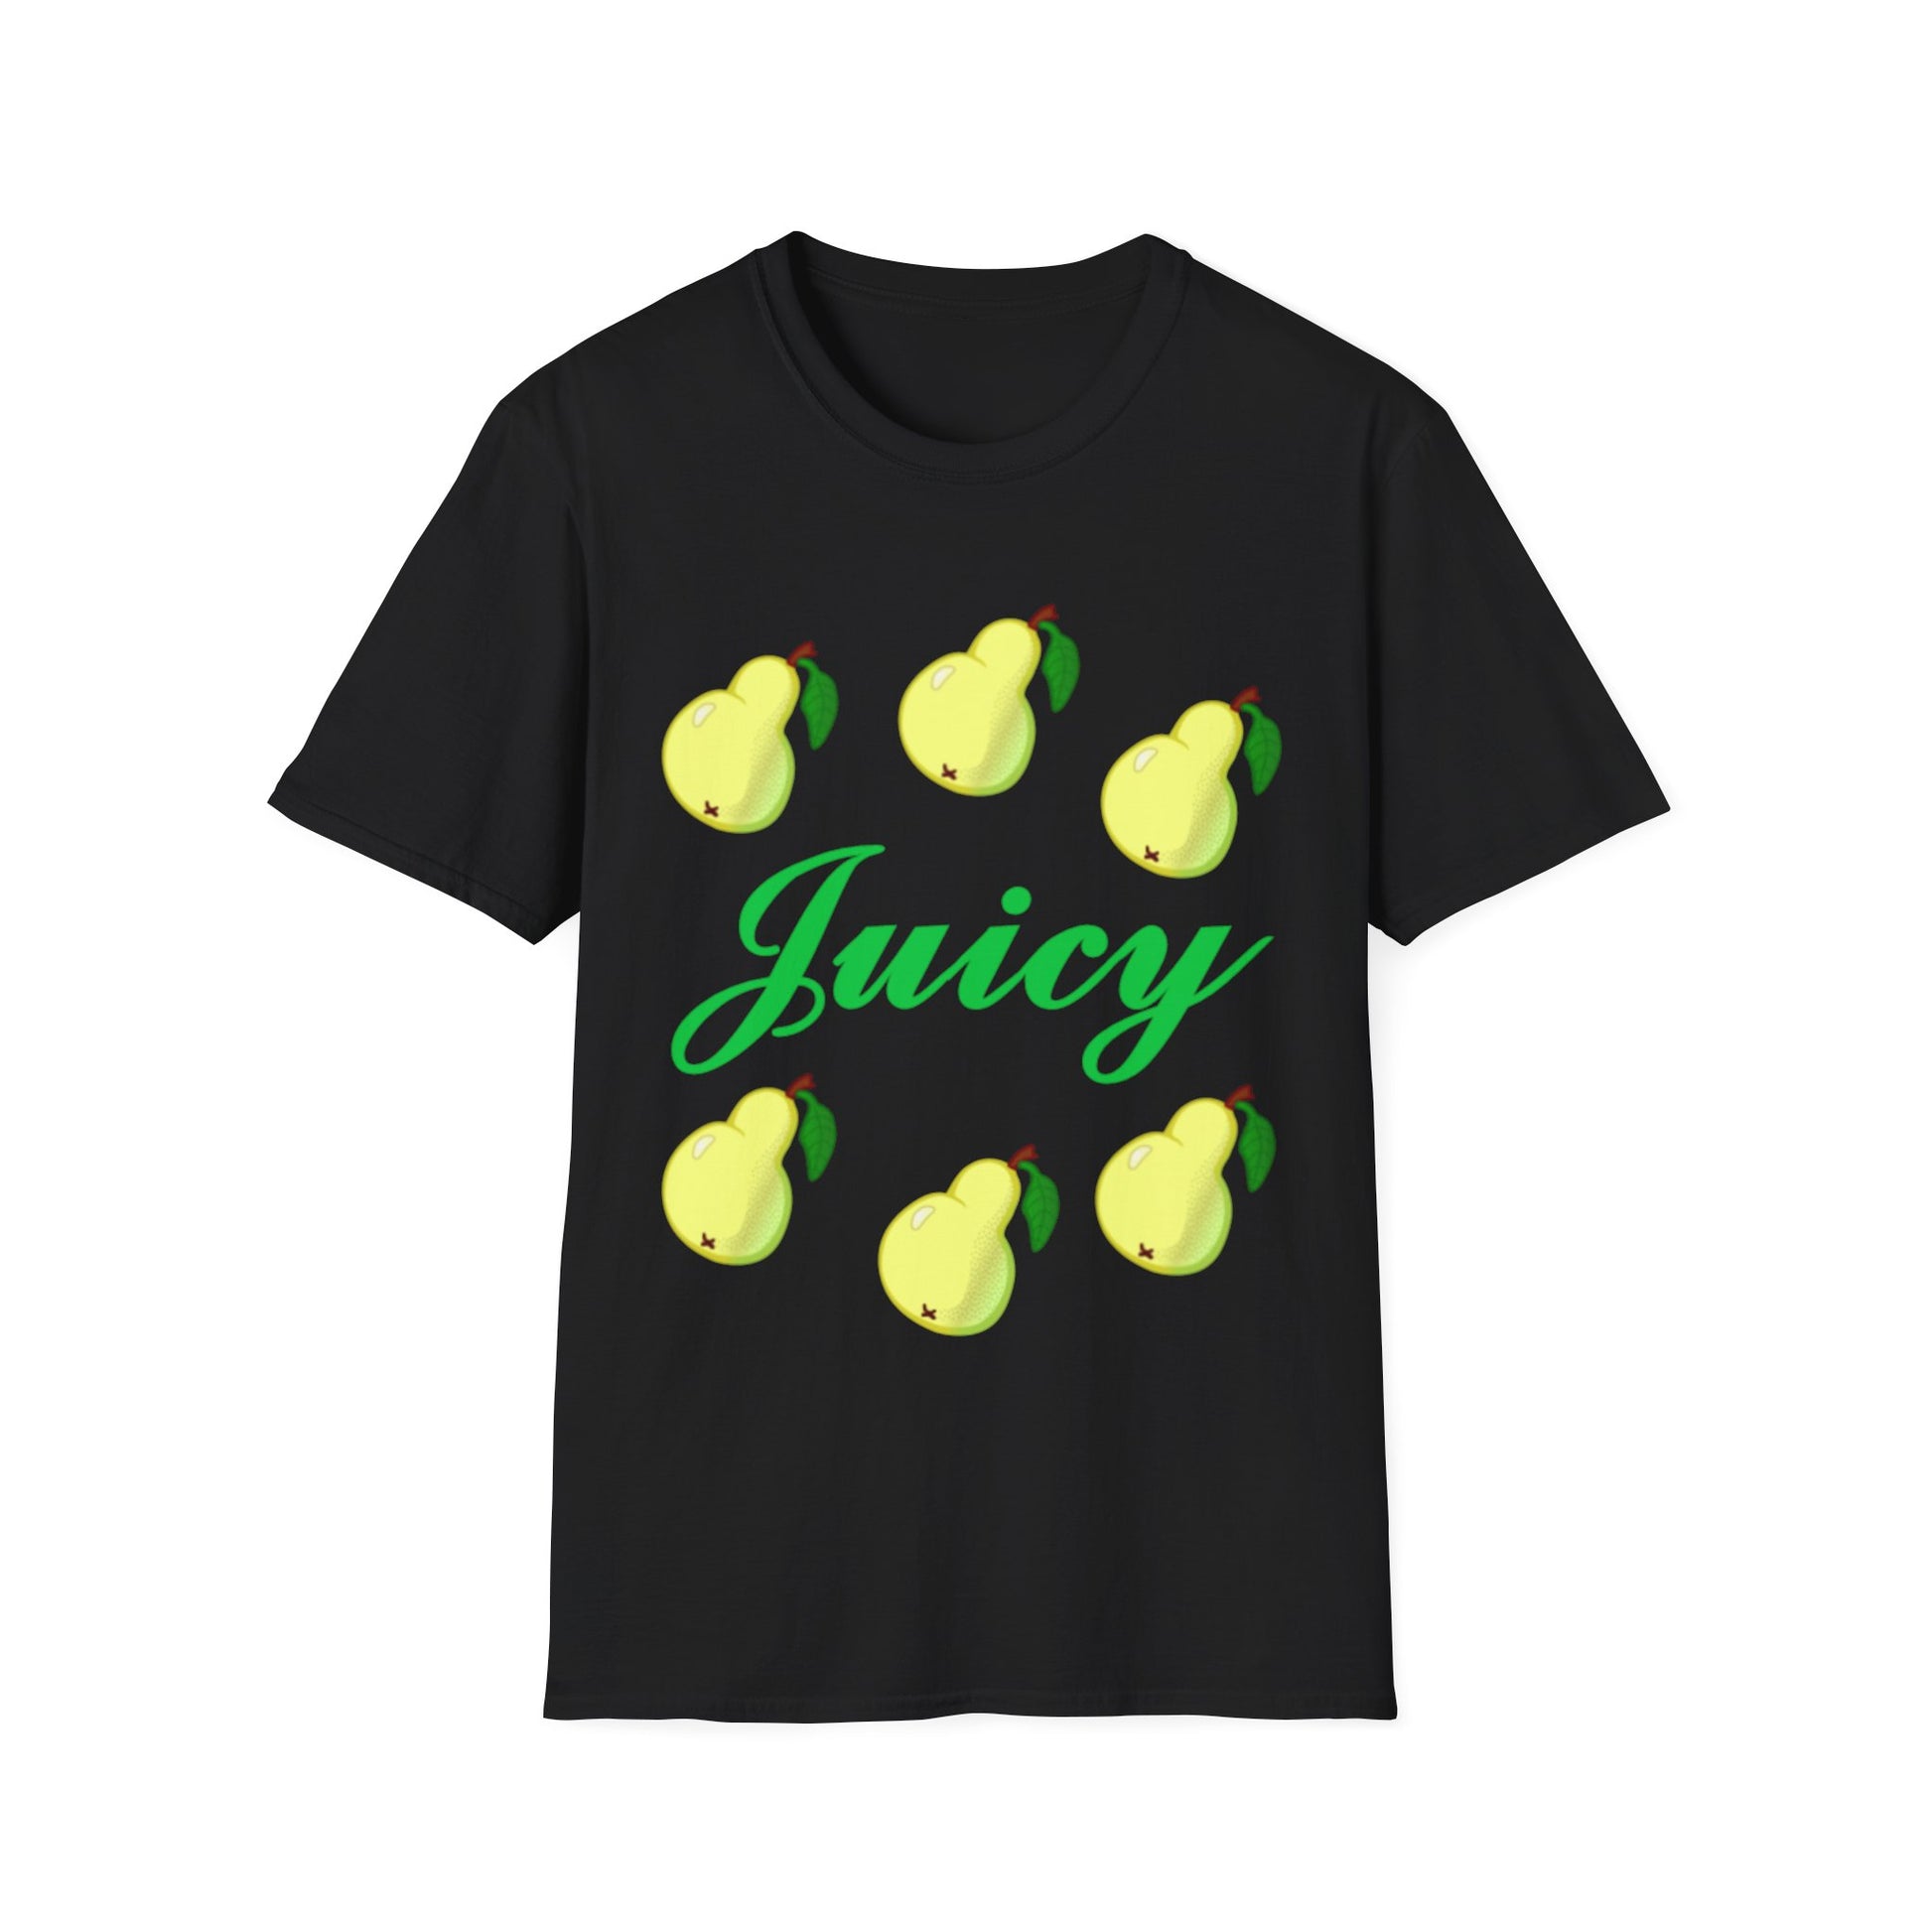 A black t-shirt with the word Juicy written in bright green and surrounded with six light green pears.